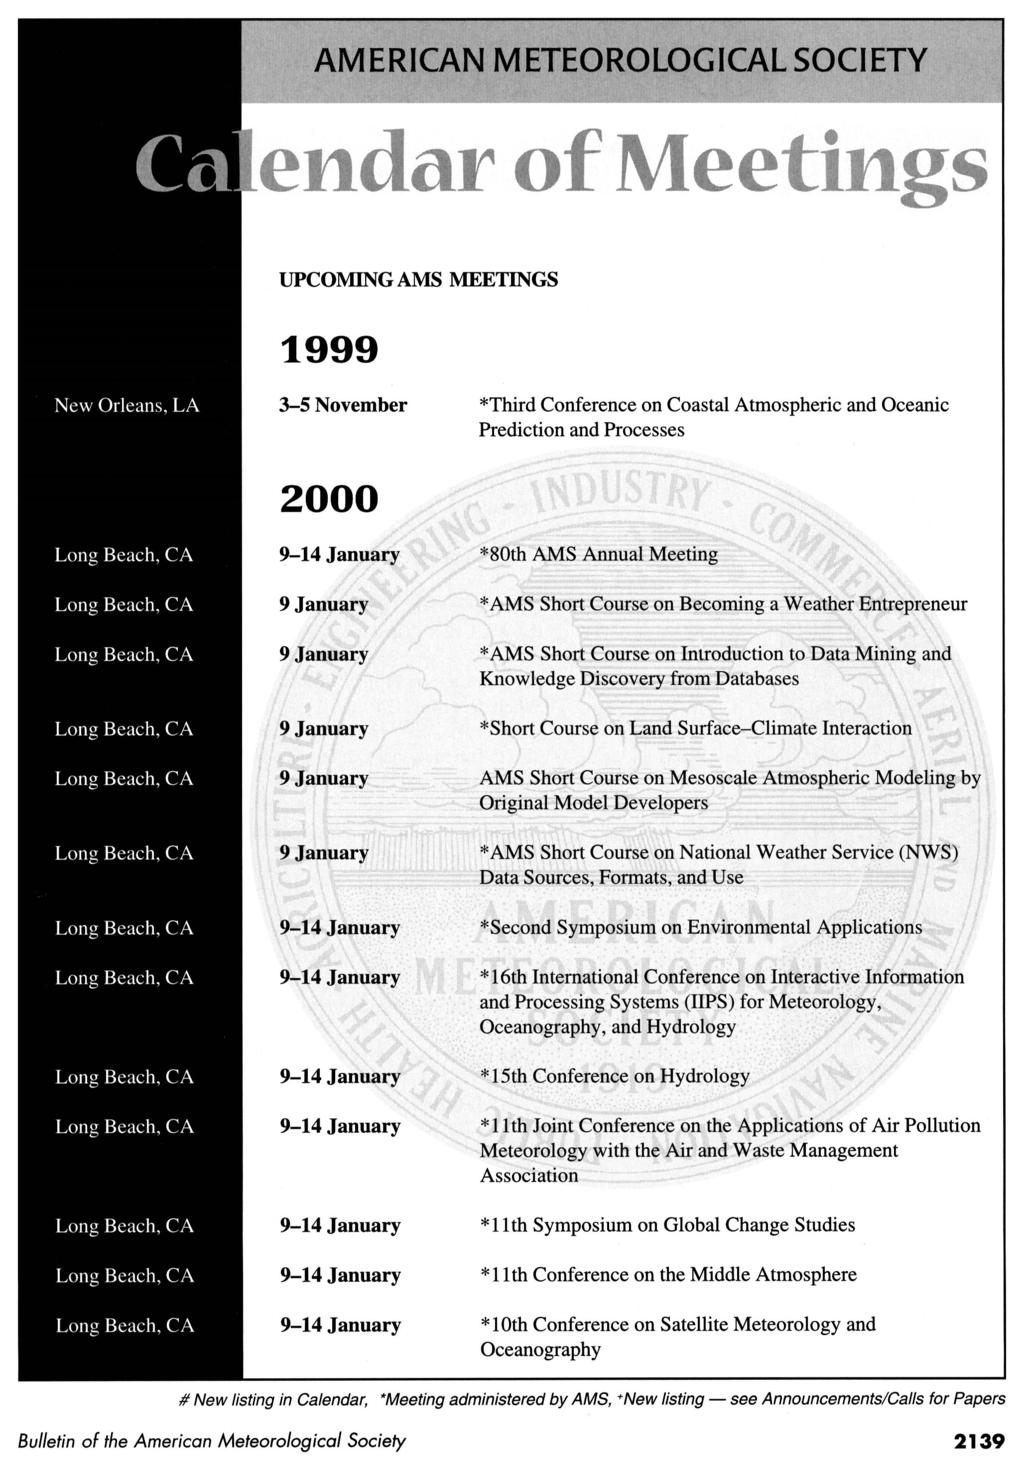 C a UPCOMING AMS MEETINGS New Orleans, LA 1999 3-5 November 2000 * Third Conference on Coastal Atmospheric and Oceanic Prediction and Processes *80th AMS Annual Meeting * AMS Short Course on Becoming